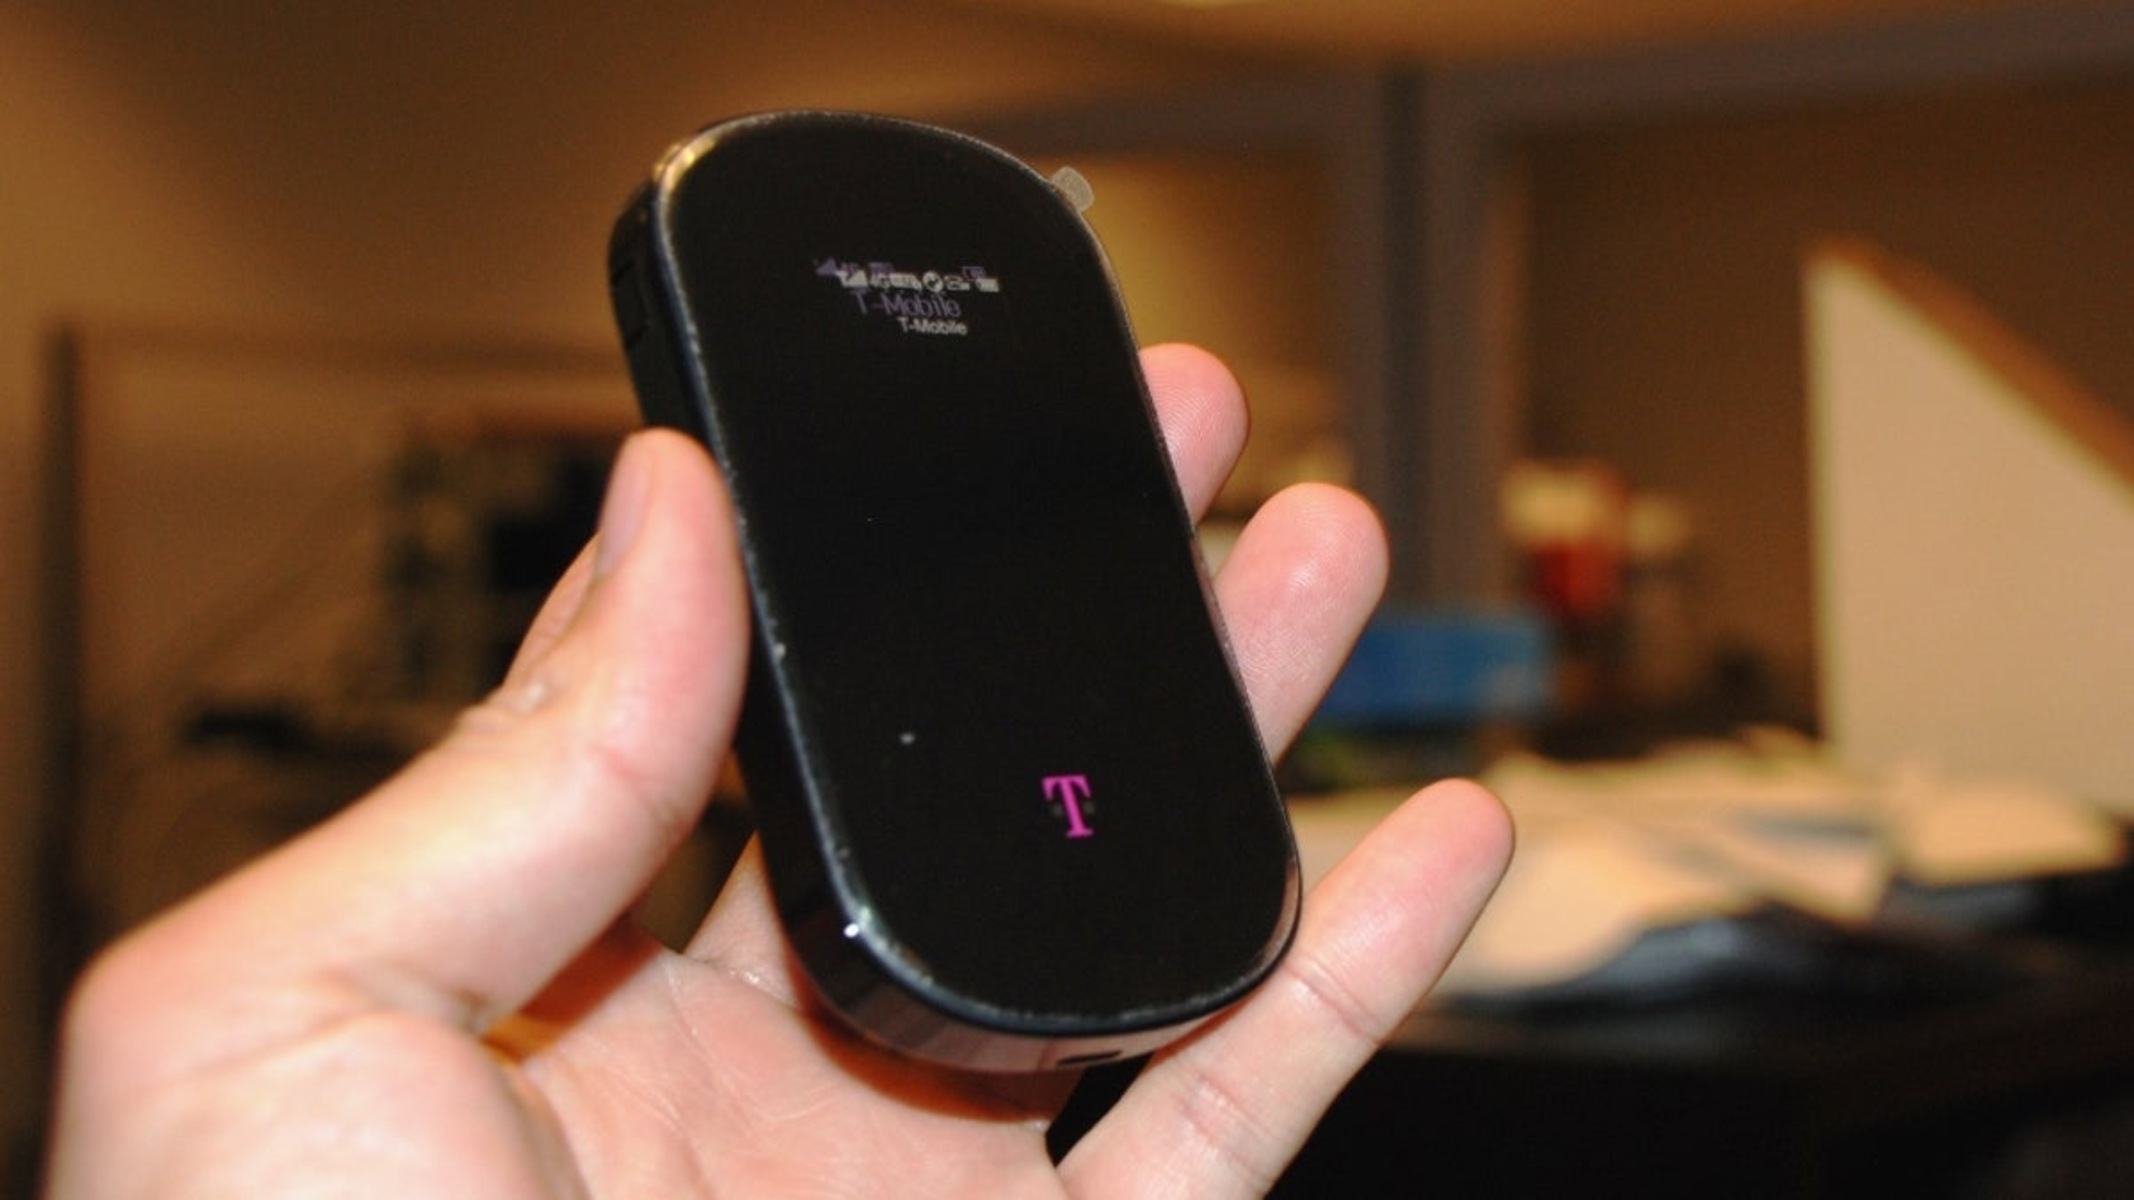 understanding-the-operation-of-t-mobile-hotspot